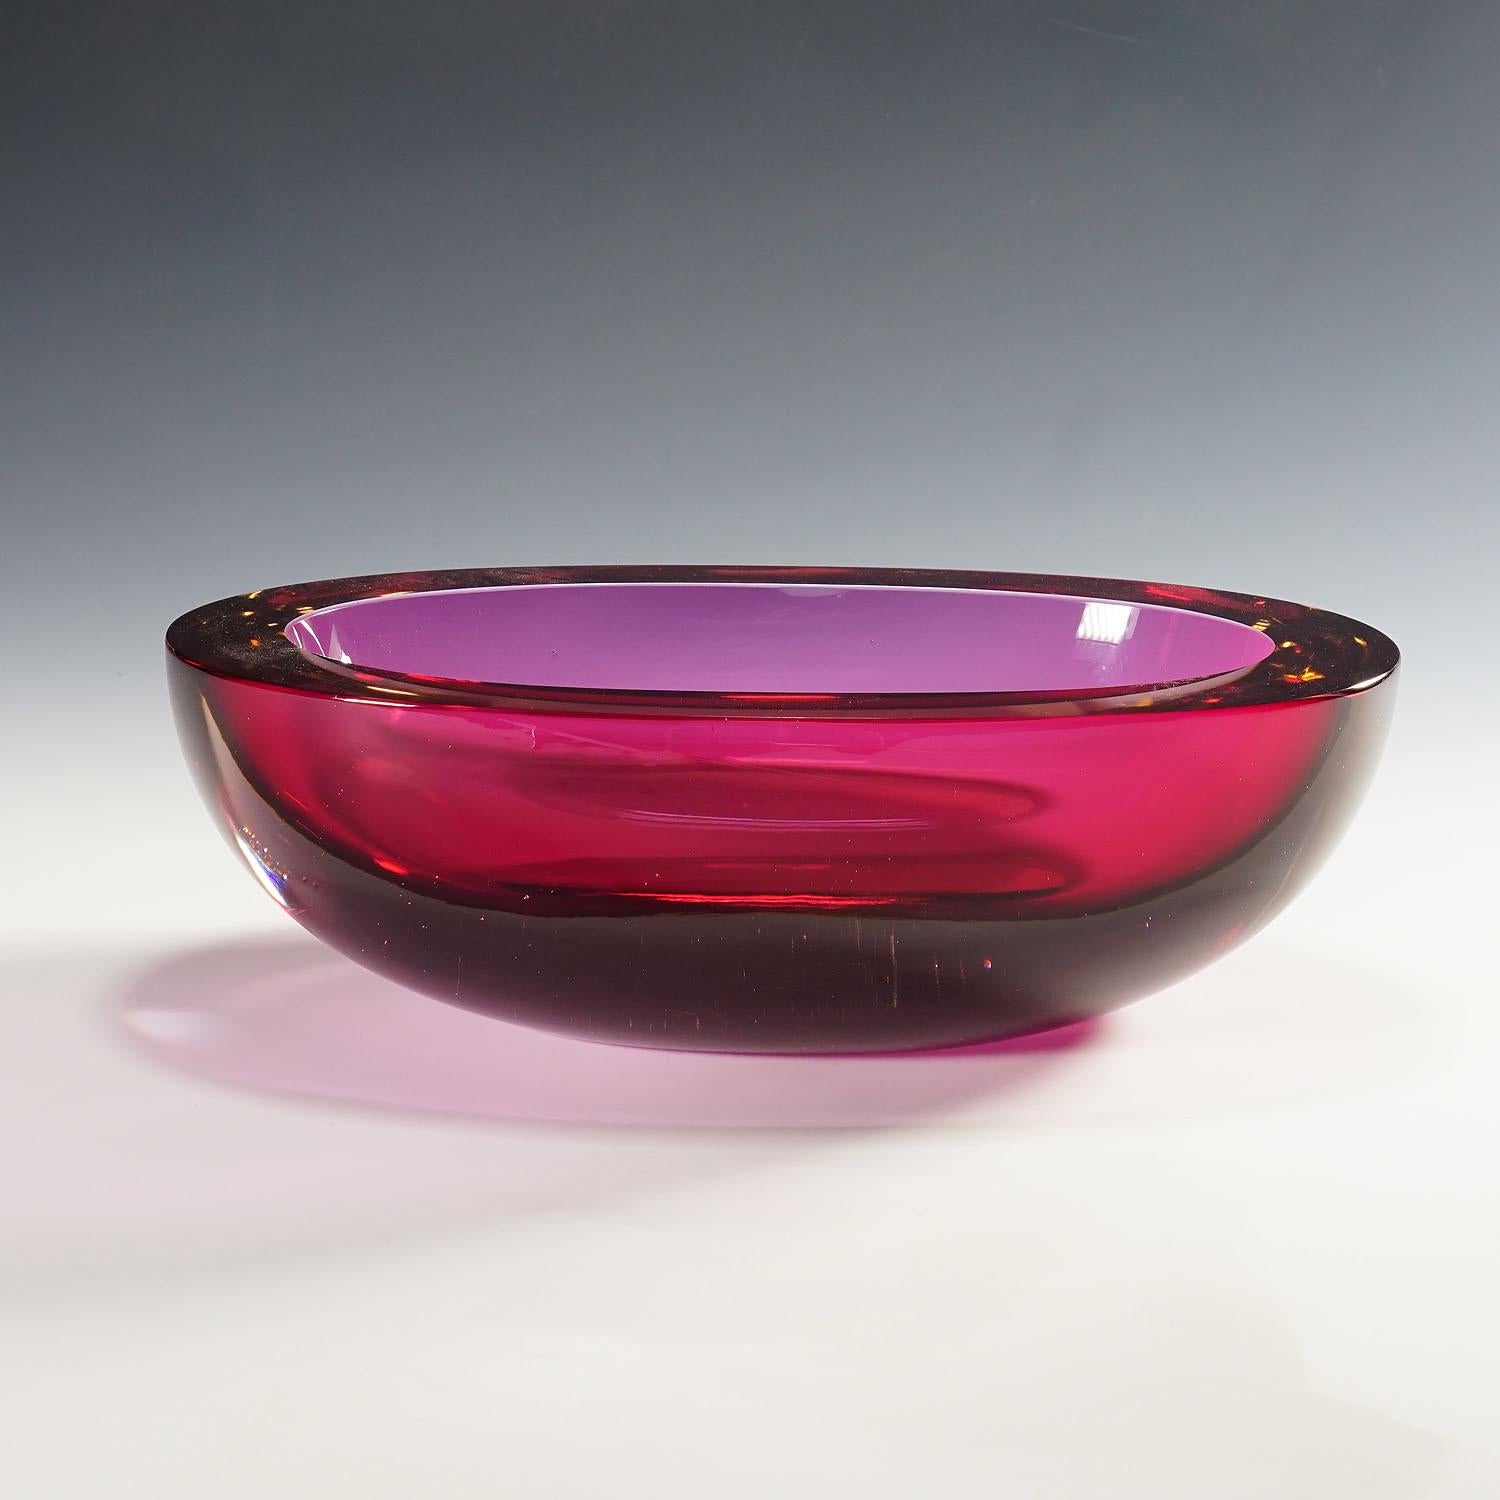 Large Seguso Vetri d'Arte Murano Sommerso Glass Bowl, 1960s.

A very large Murano sommerso art glass bowl. Designed by Flavio Poli or Mario Pinzoni and manufactured by Seguso Vetri d'Arte circa 1960s. Manufactured in very thick ruby red glass with a